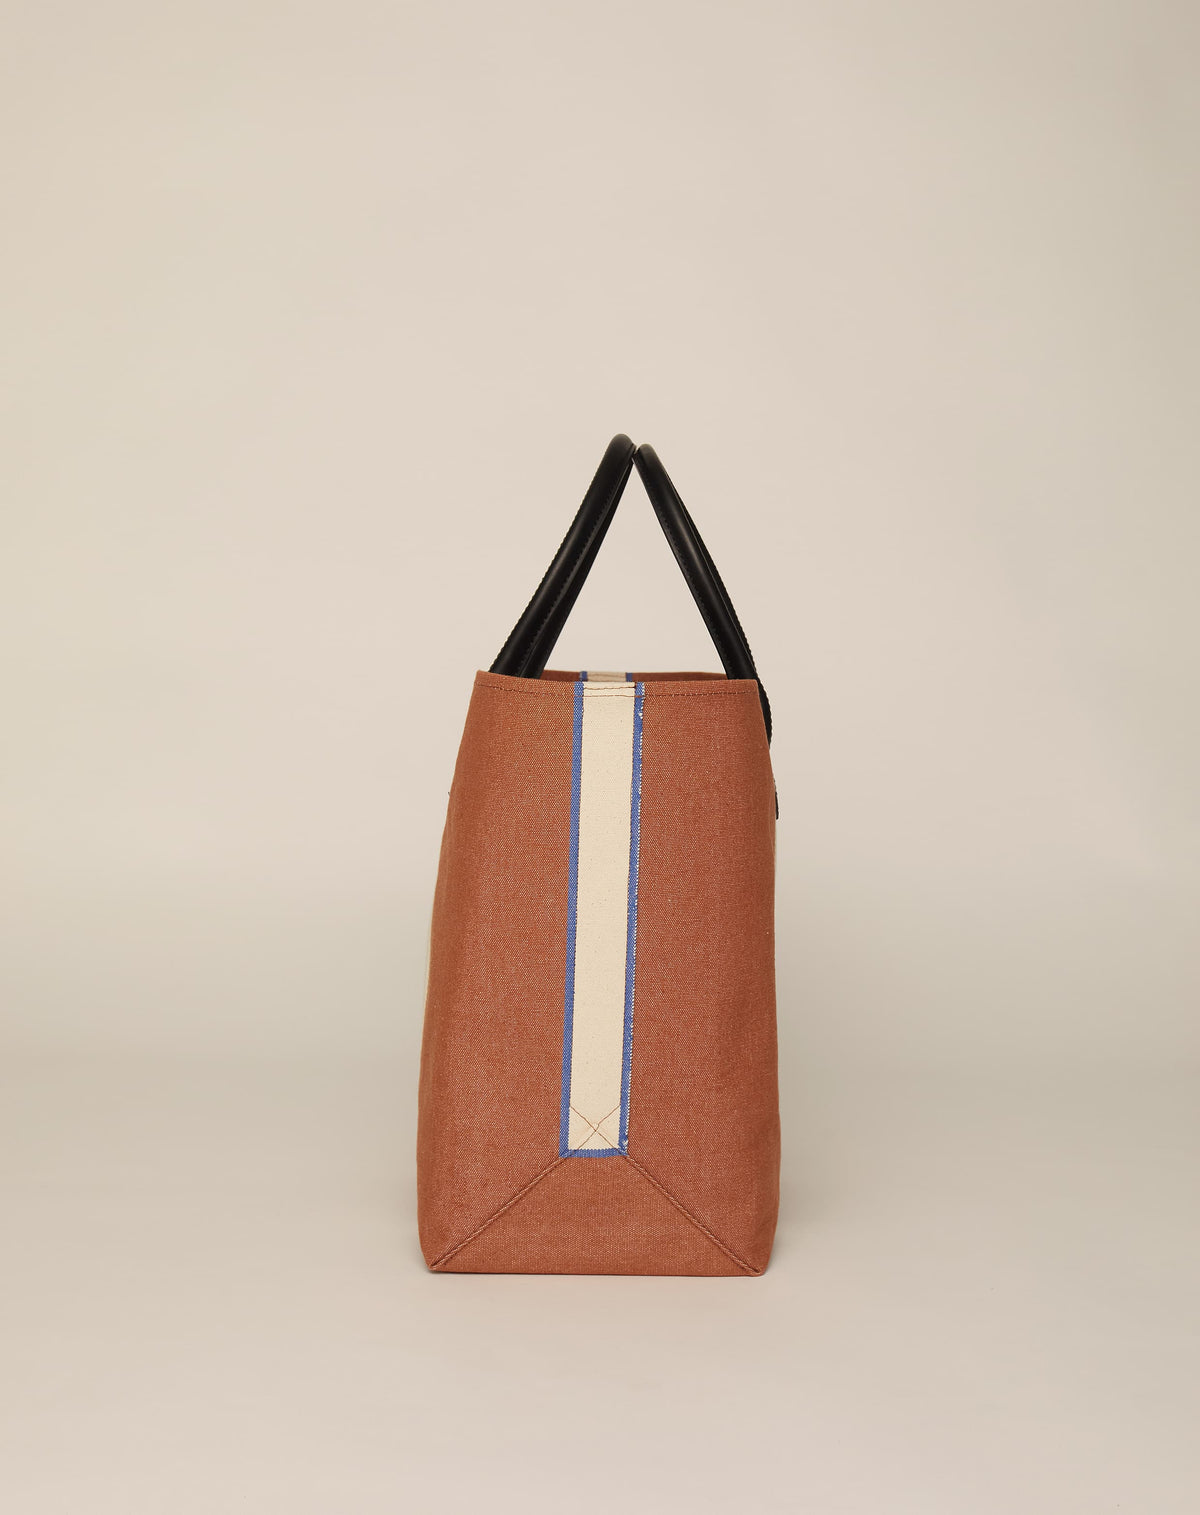 Profile image of classic canvas tote bag in tan colour with black leather handles and contrasting natural ecru stripes.